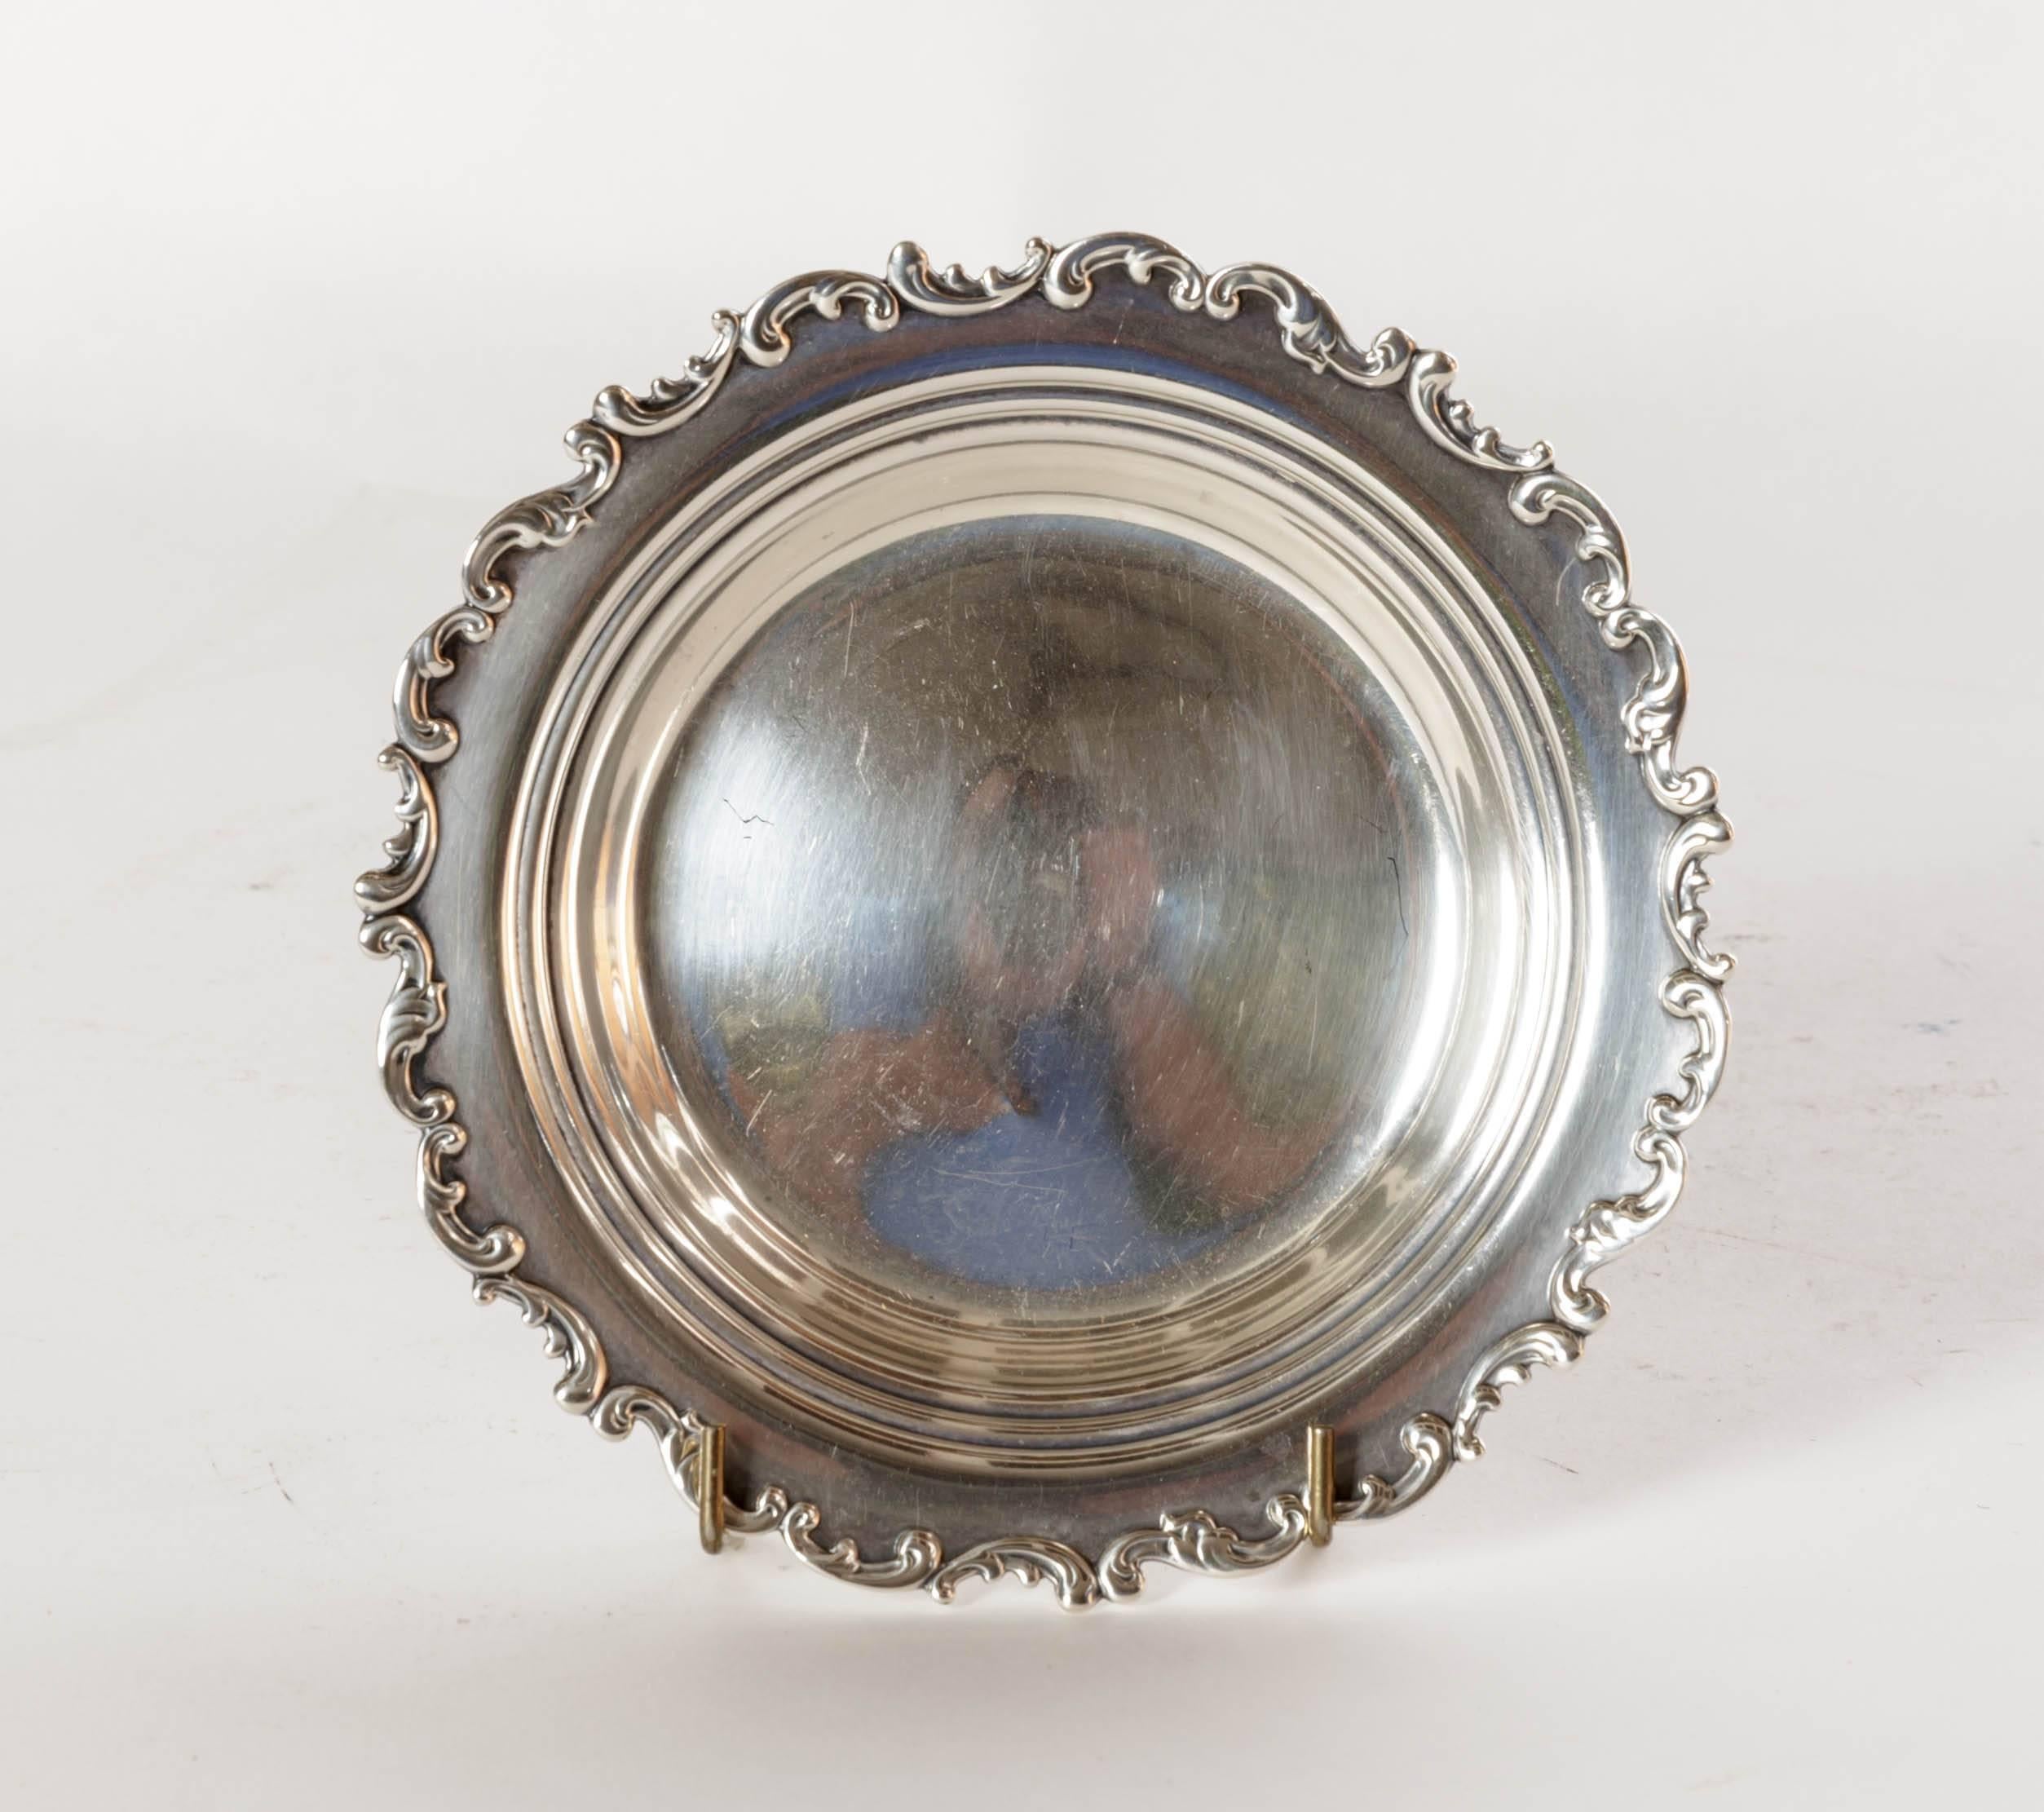 1920s sterling silver wine coaster with scalloped Baroque influenced rim. The inner rim has a plain double border, the sides taper to a slightly convex bottom. Very decorative and practical to protect a table cloth or table surface. The exterior